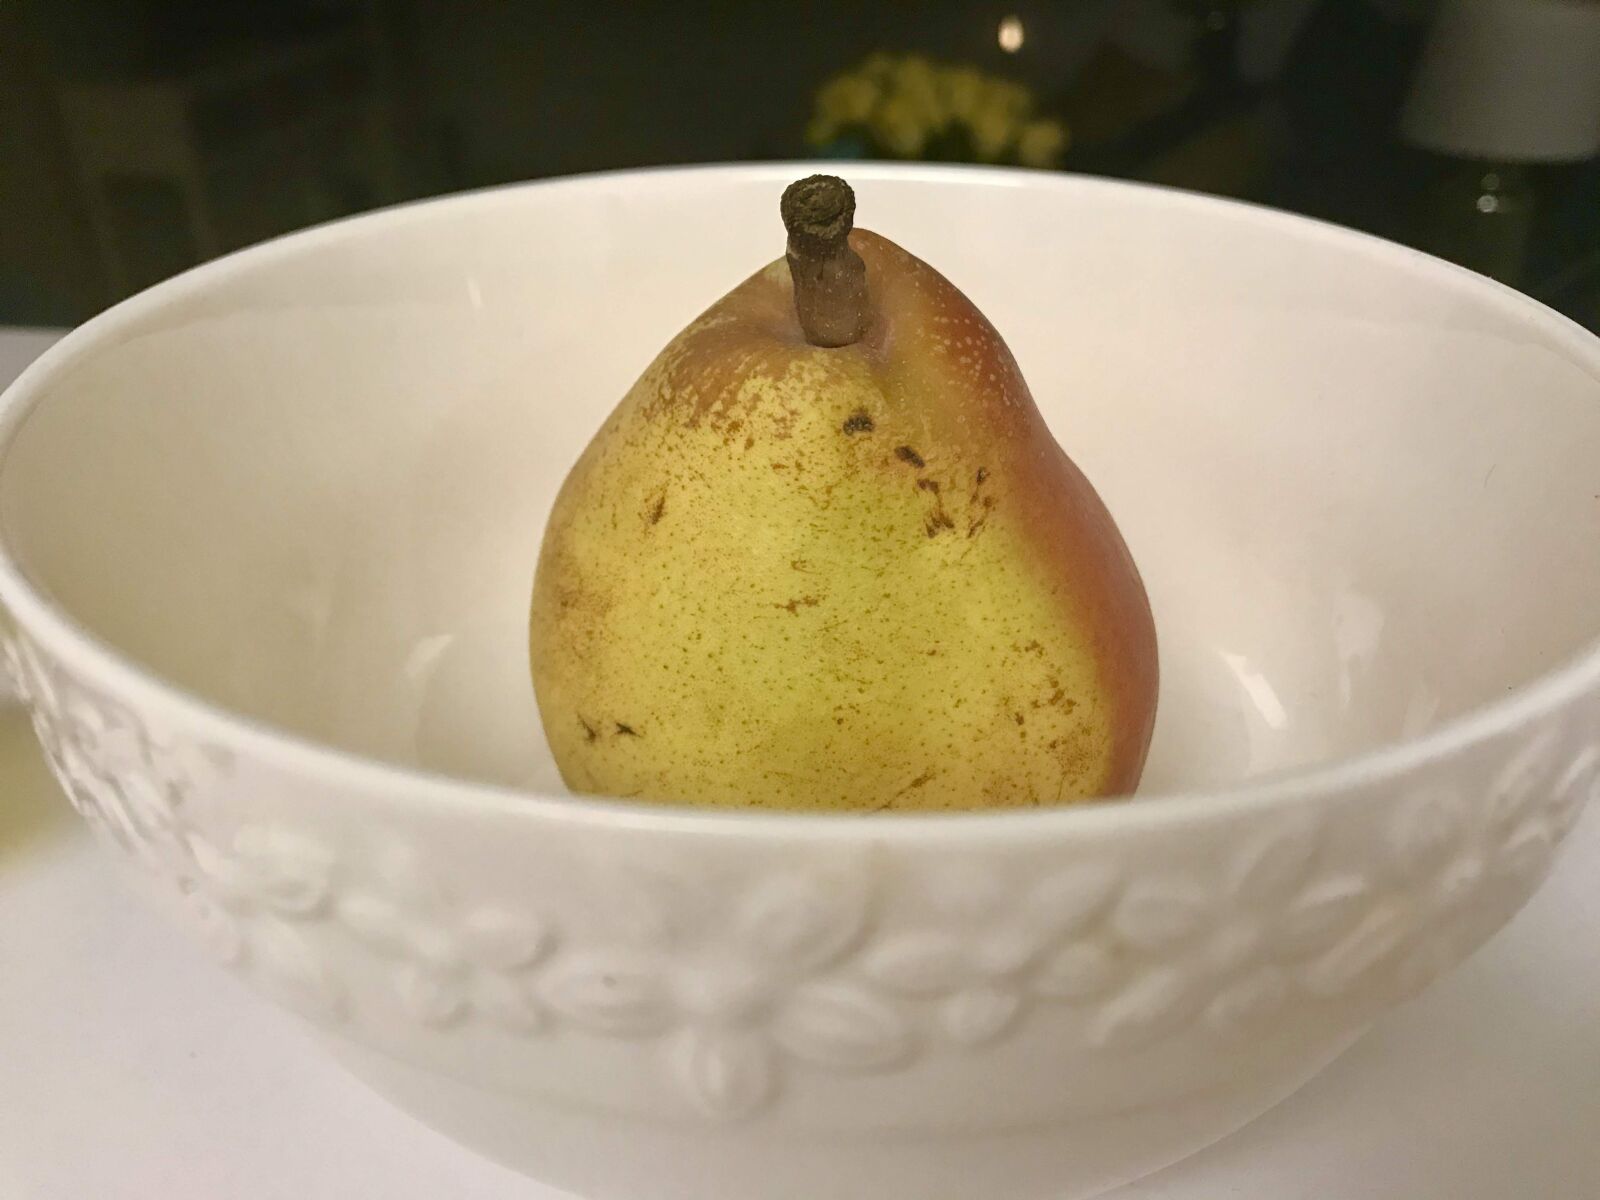 Apple iPhone 7 sample photo. Pear, bowl, white photography